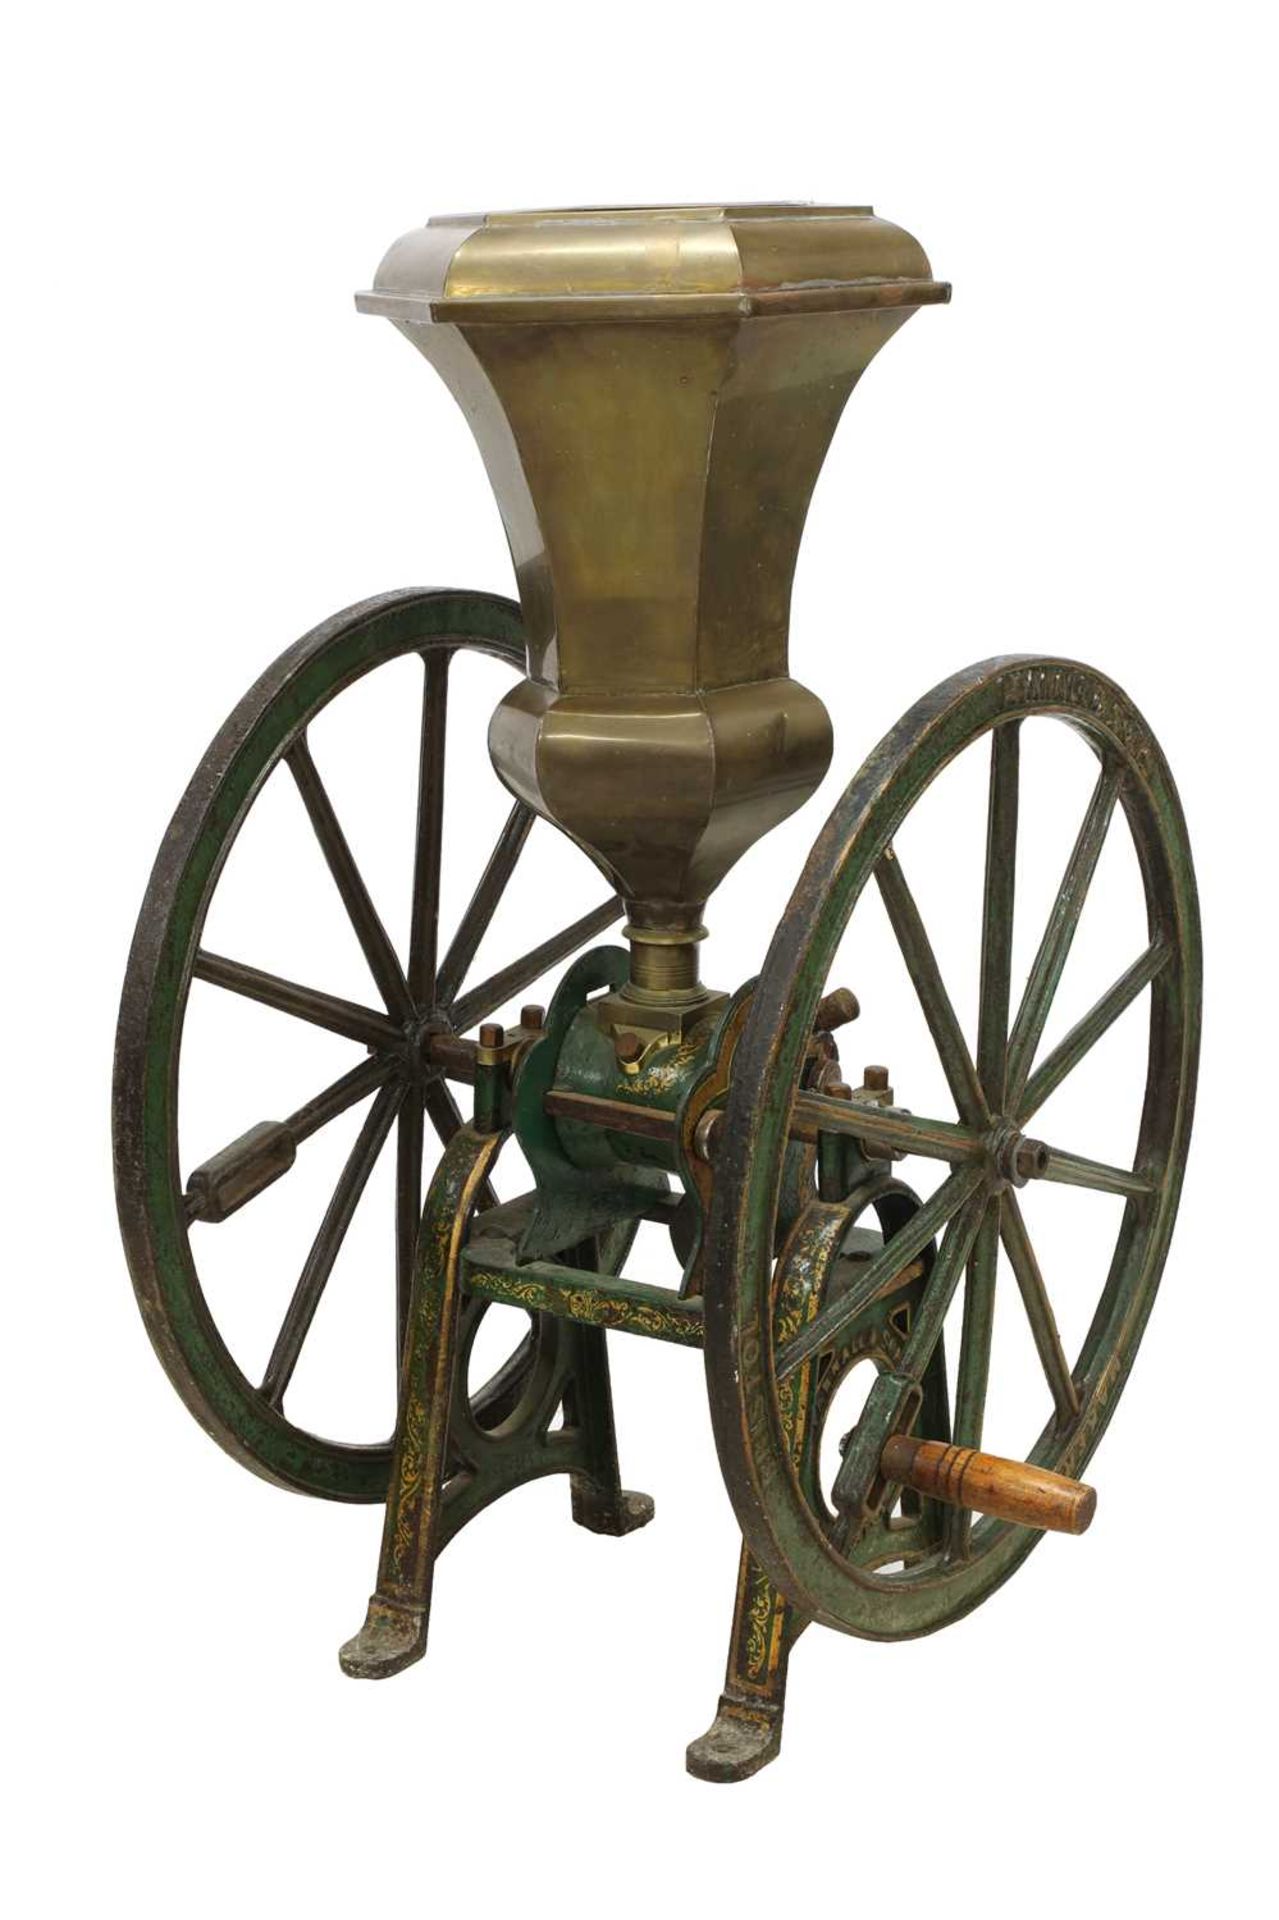 A large coffee grinder by Parnell & Sons,